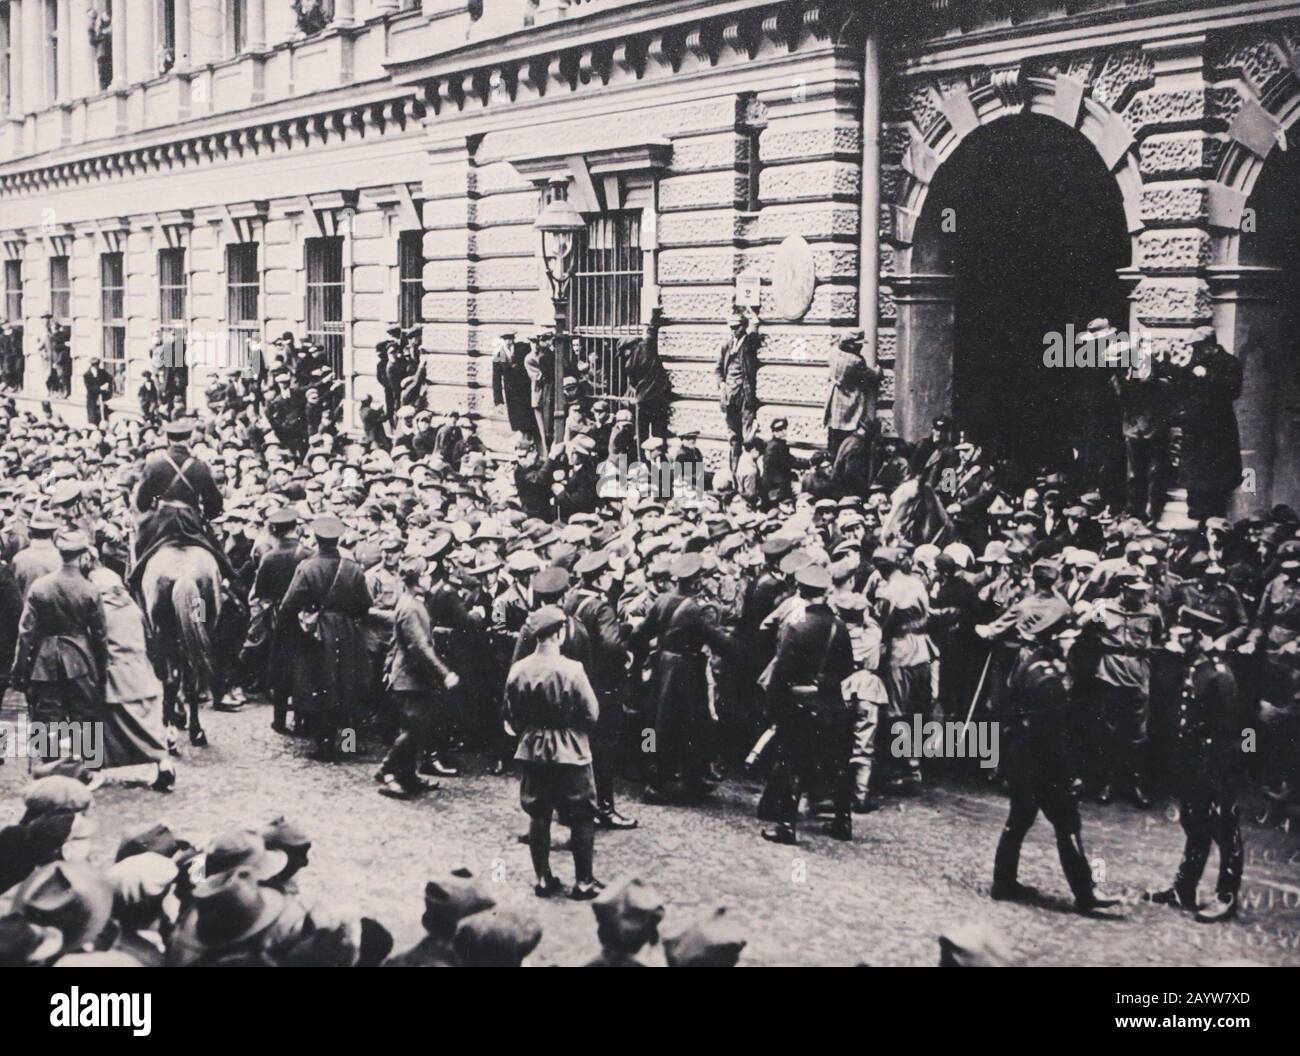 Cracow. Krakow. Poland. Workers manifestation in the city center 1923. Stock Photo